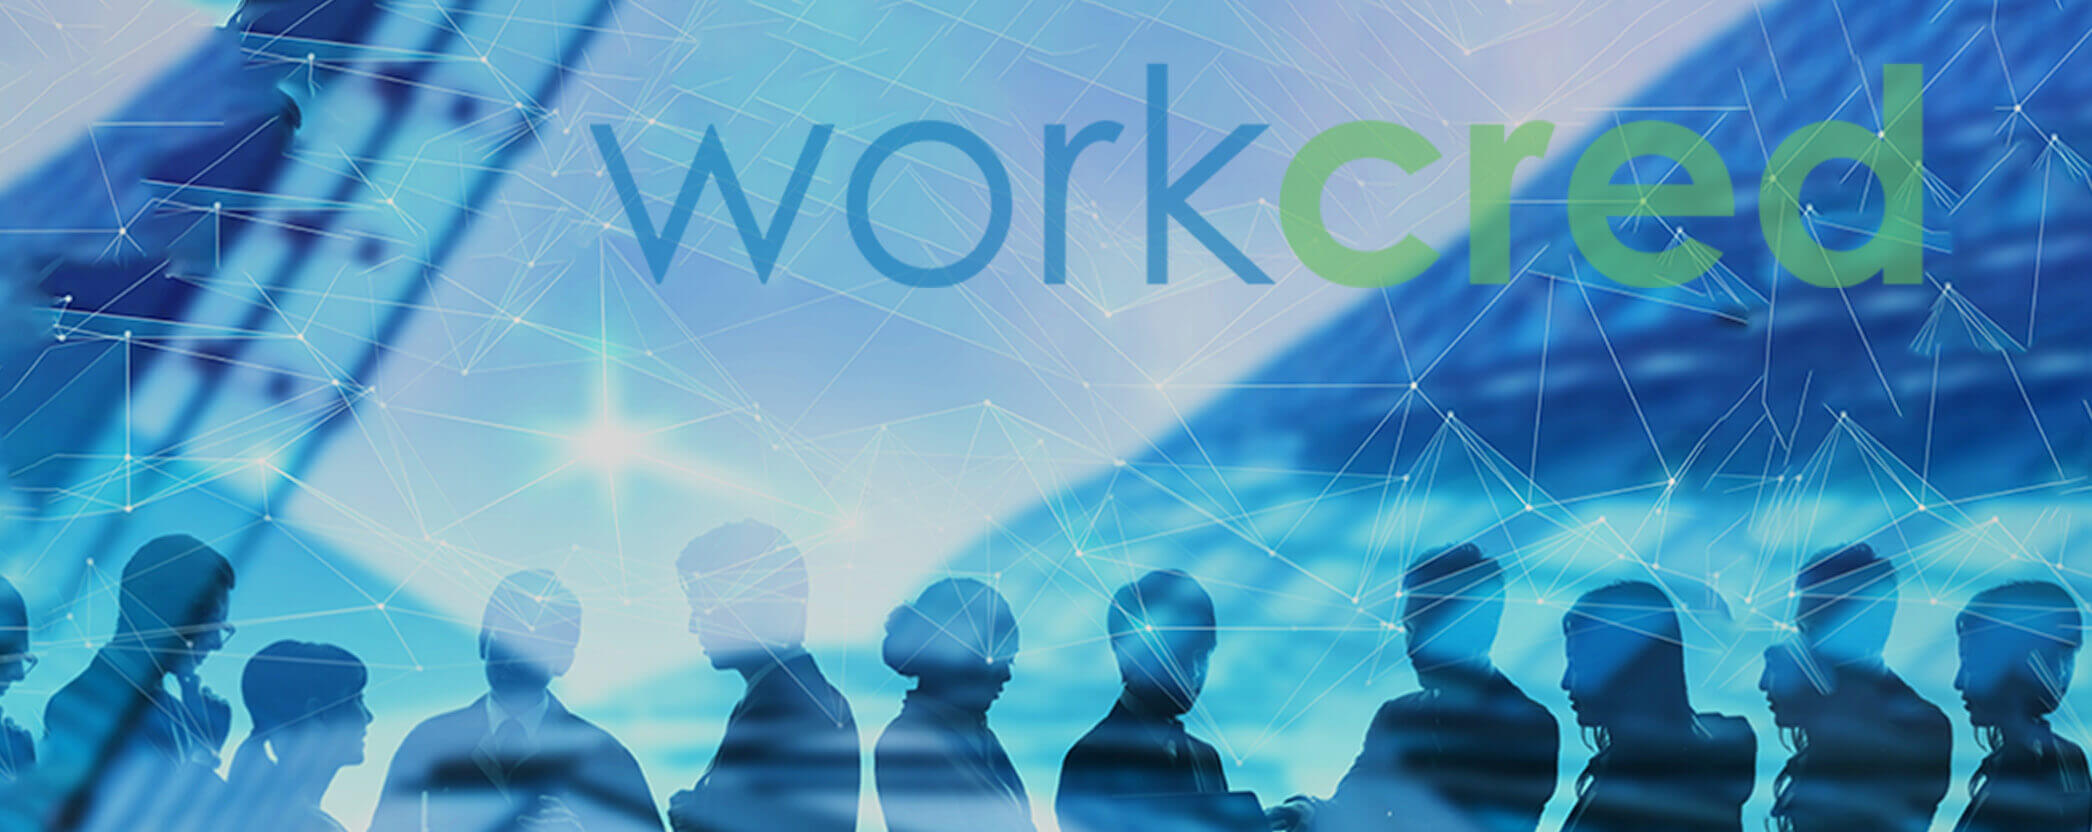 Abstract modern workforce background with Worcred logo